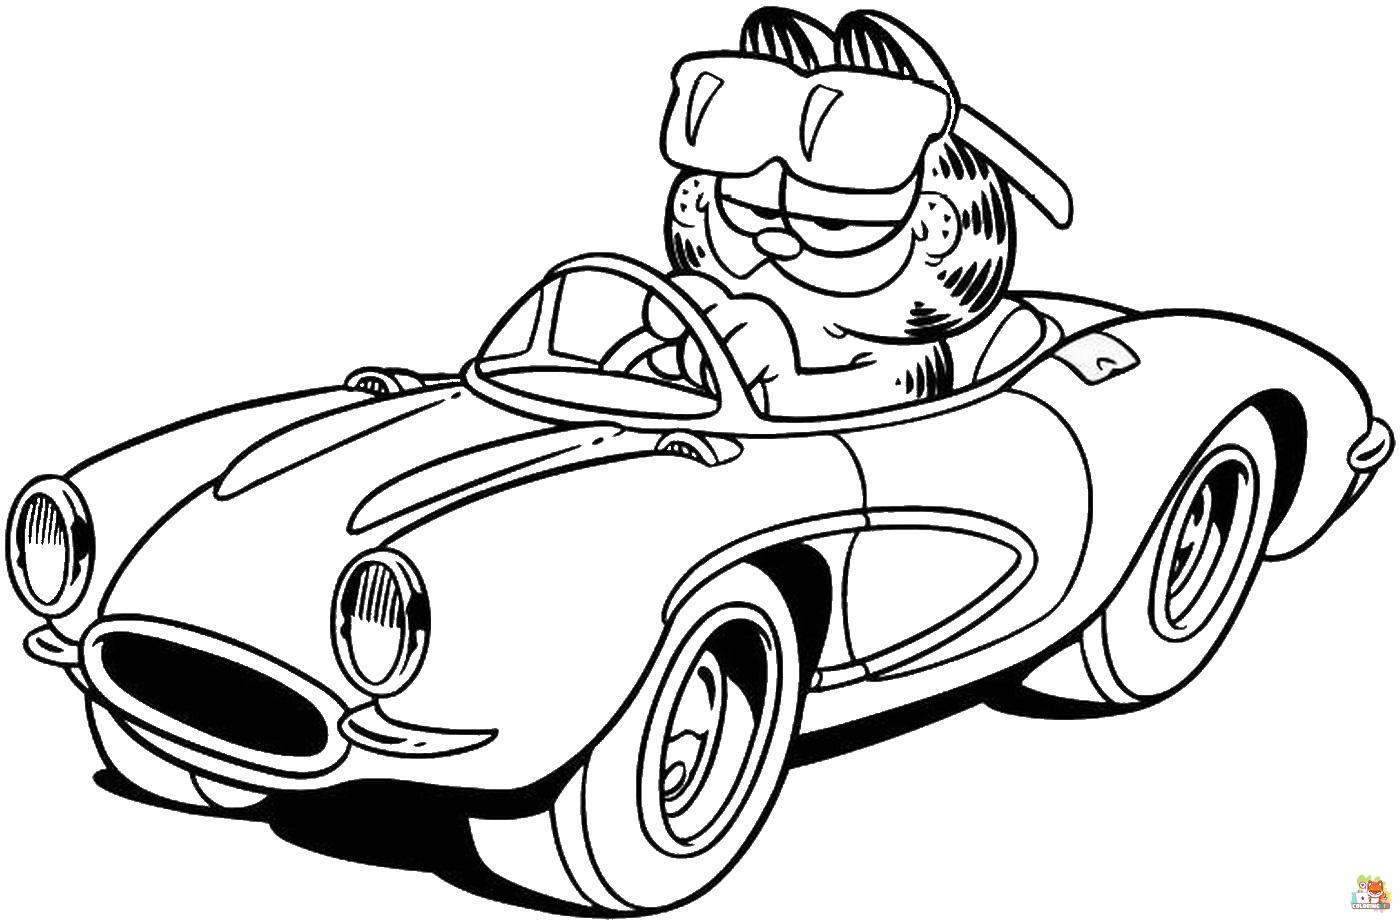 Garfield coloring pages free